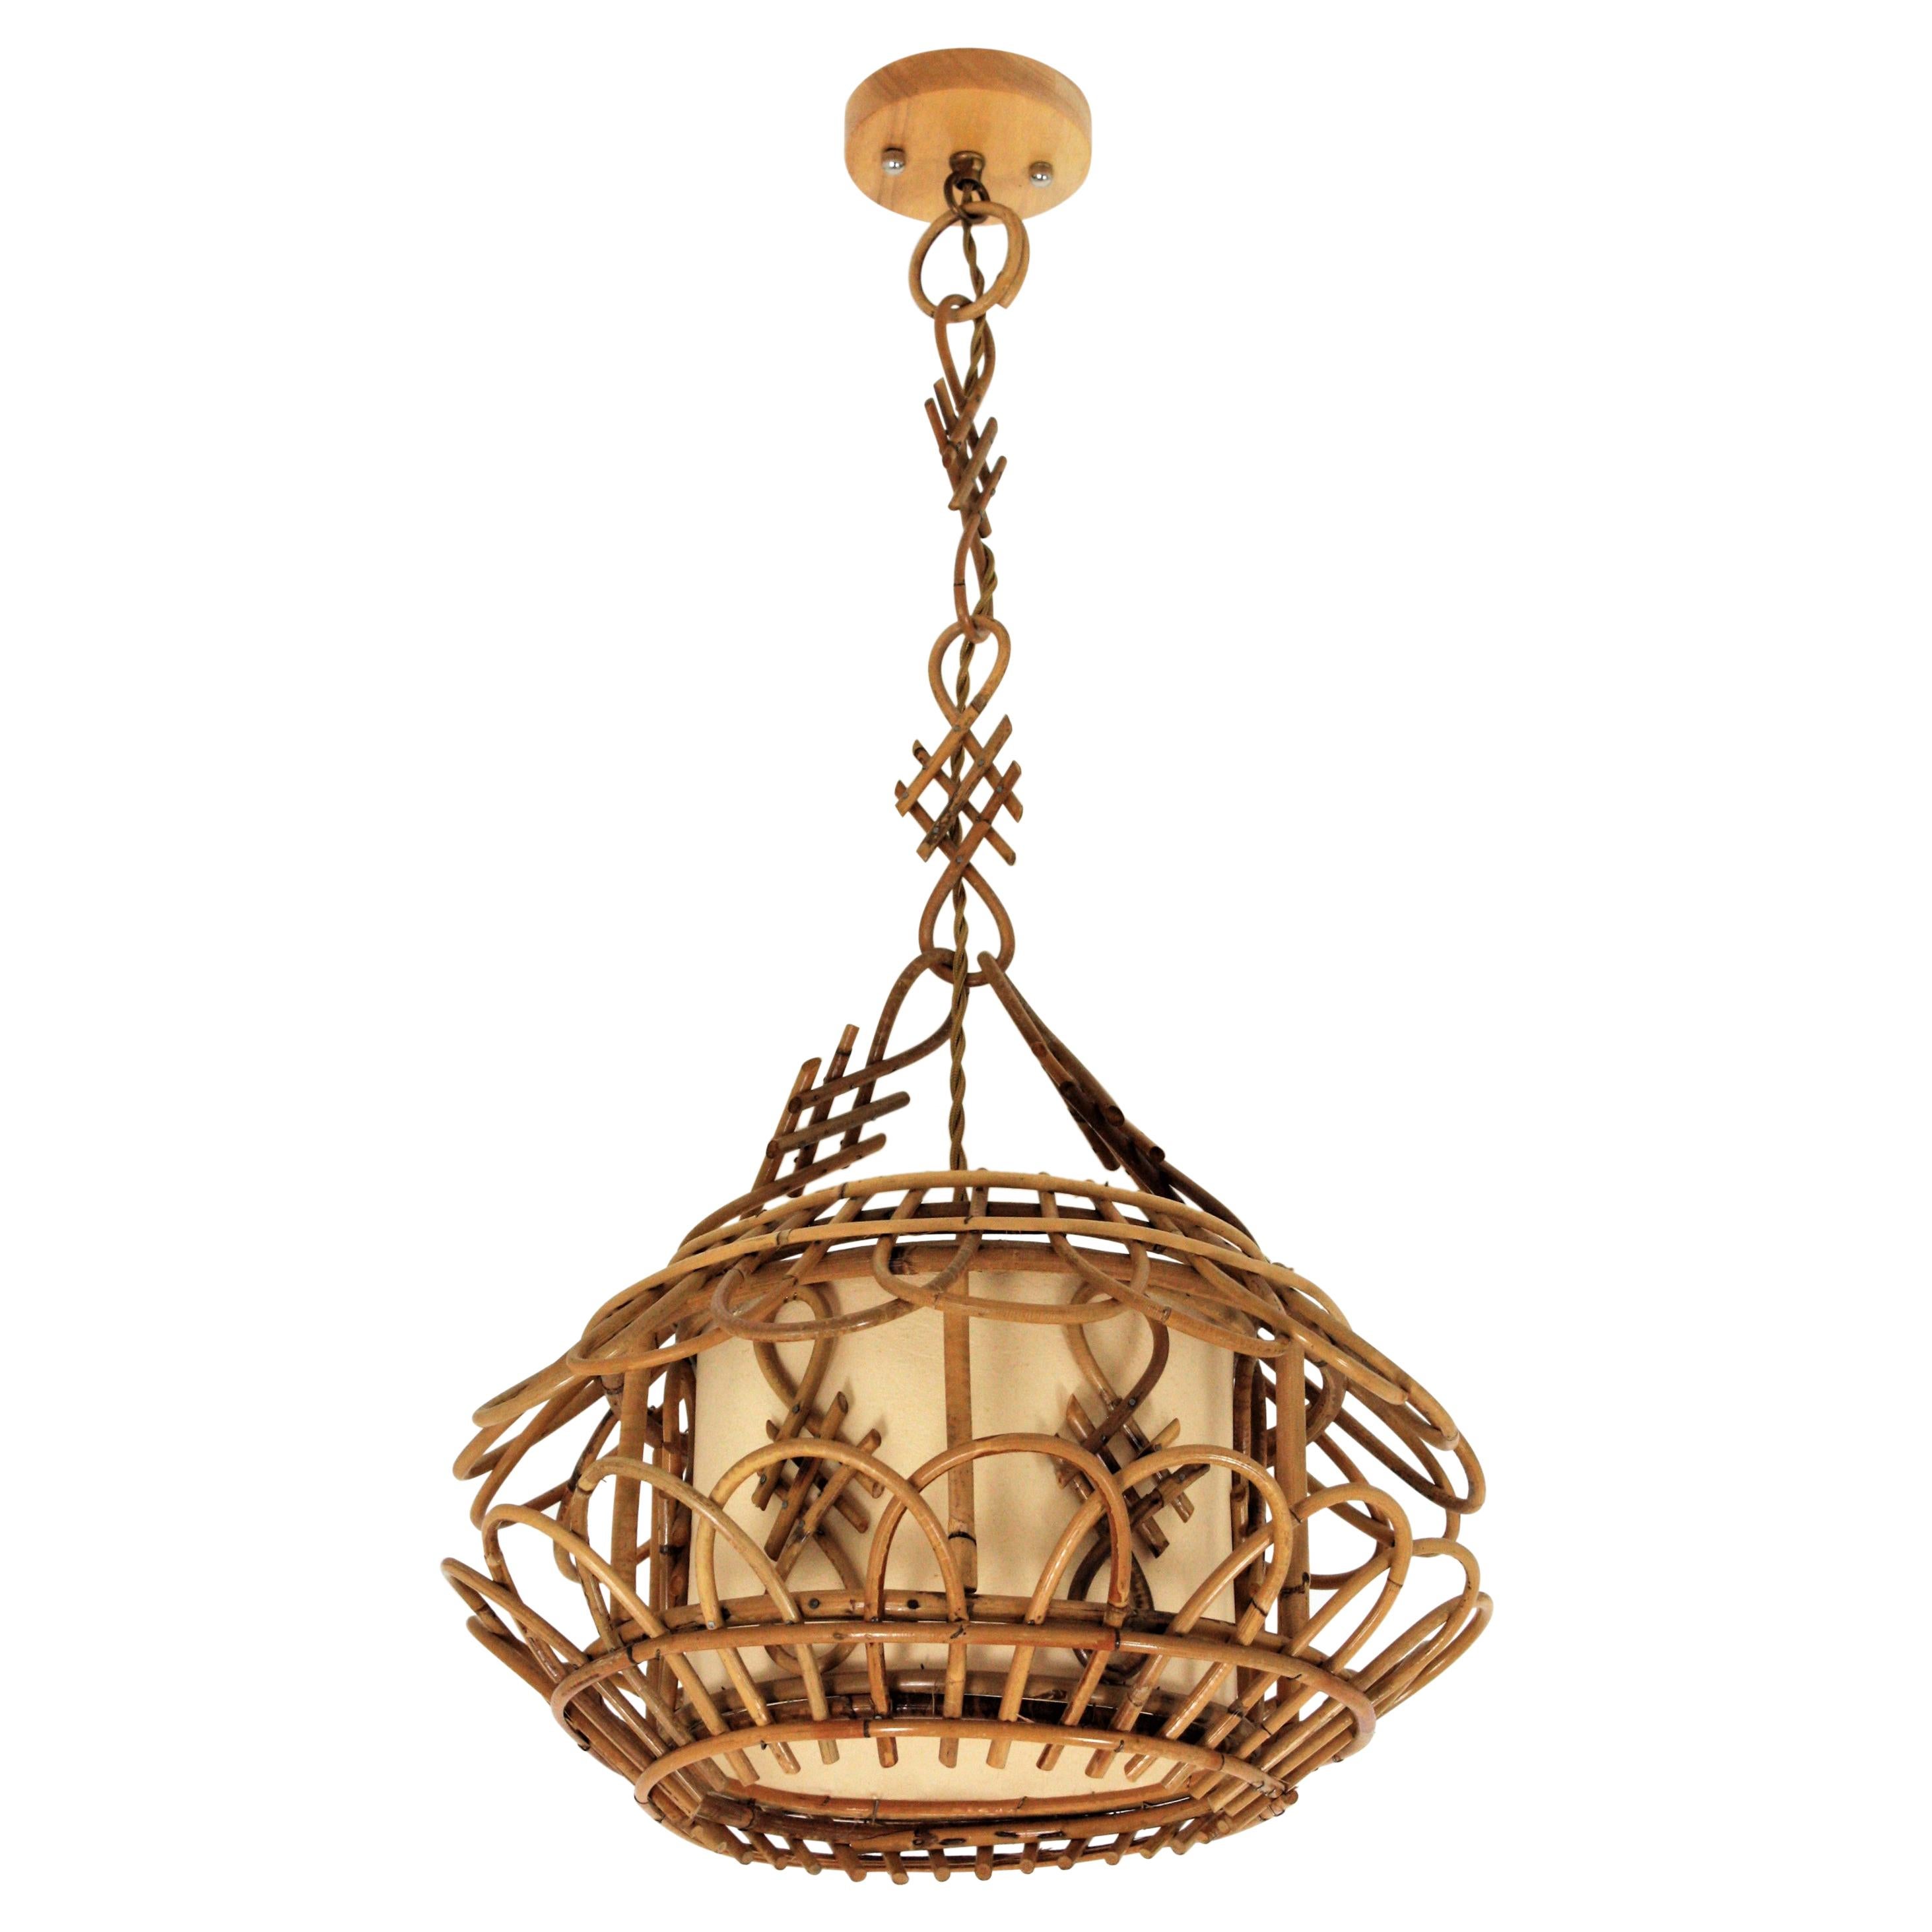 French Modernist Rattan Pagoda Pendant Lamp or Lantern with Chinoiserie Accents